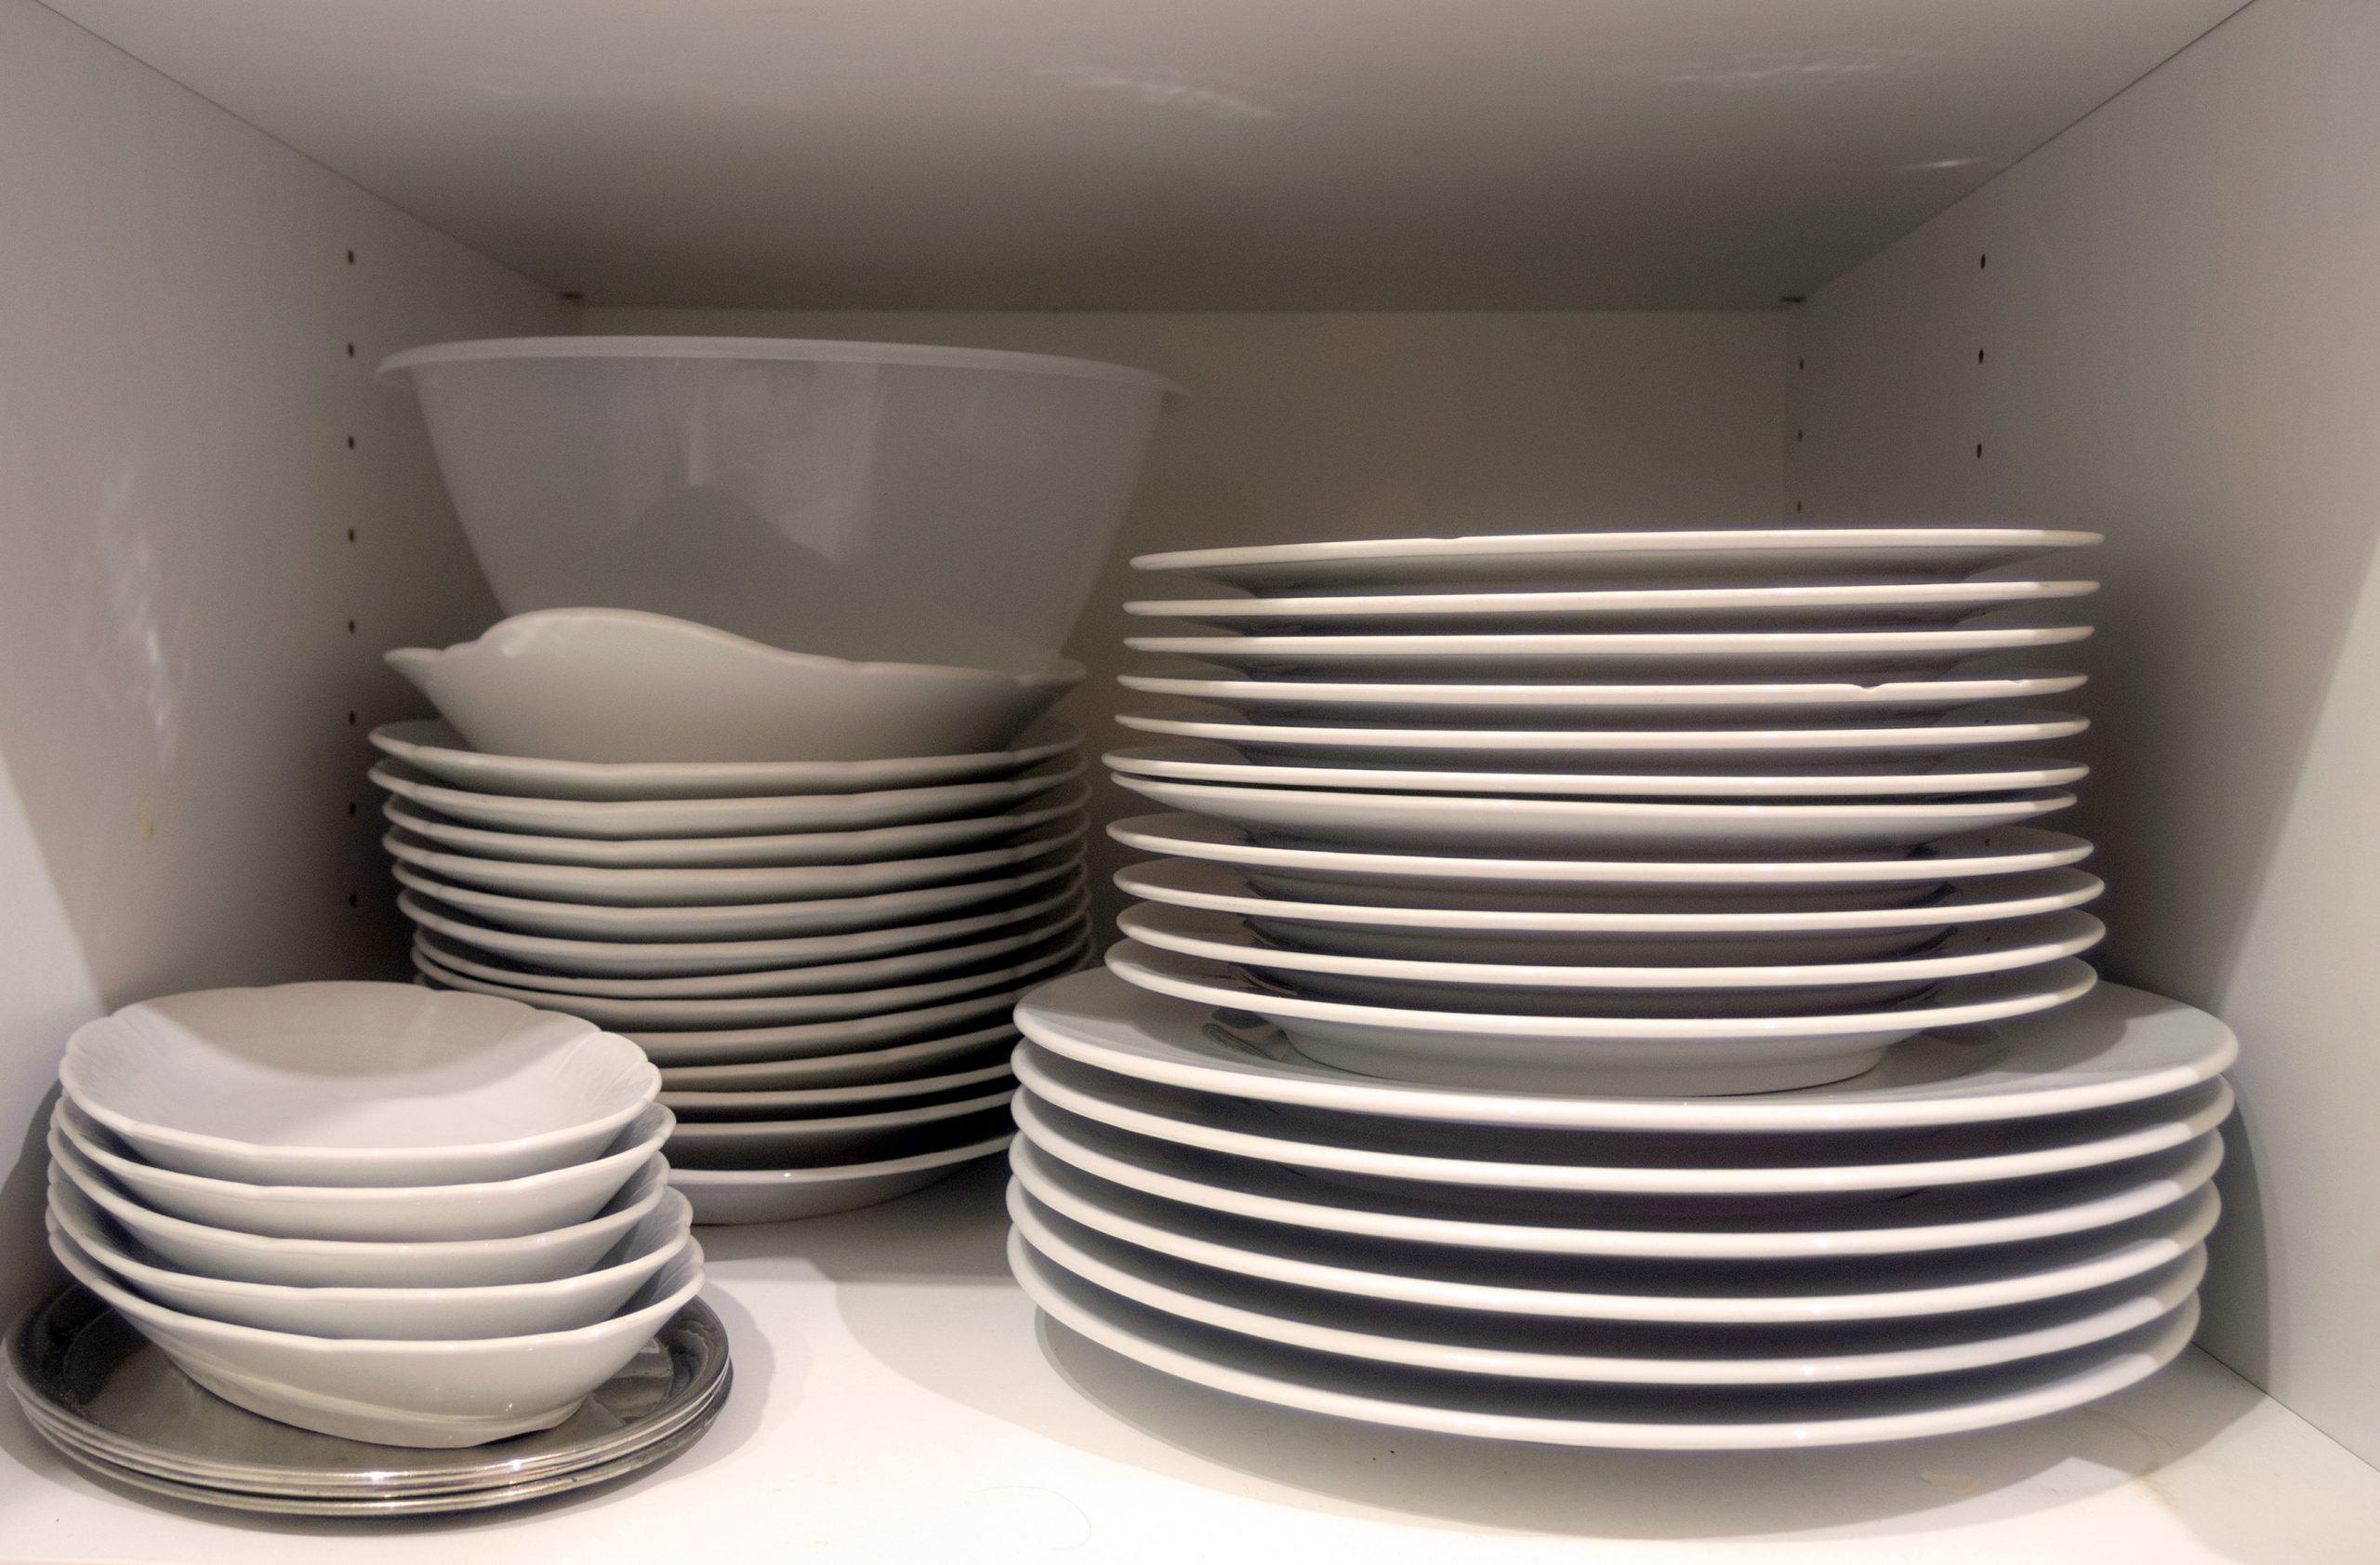 Dish Packing Guide: How to Pack Dishes for Moving (Part 2)